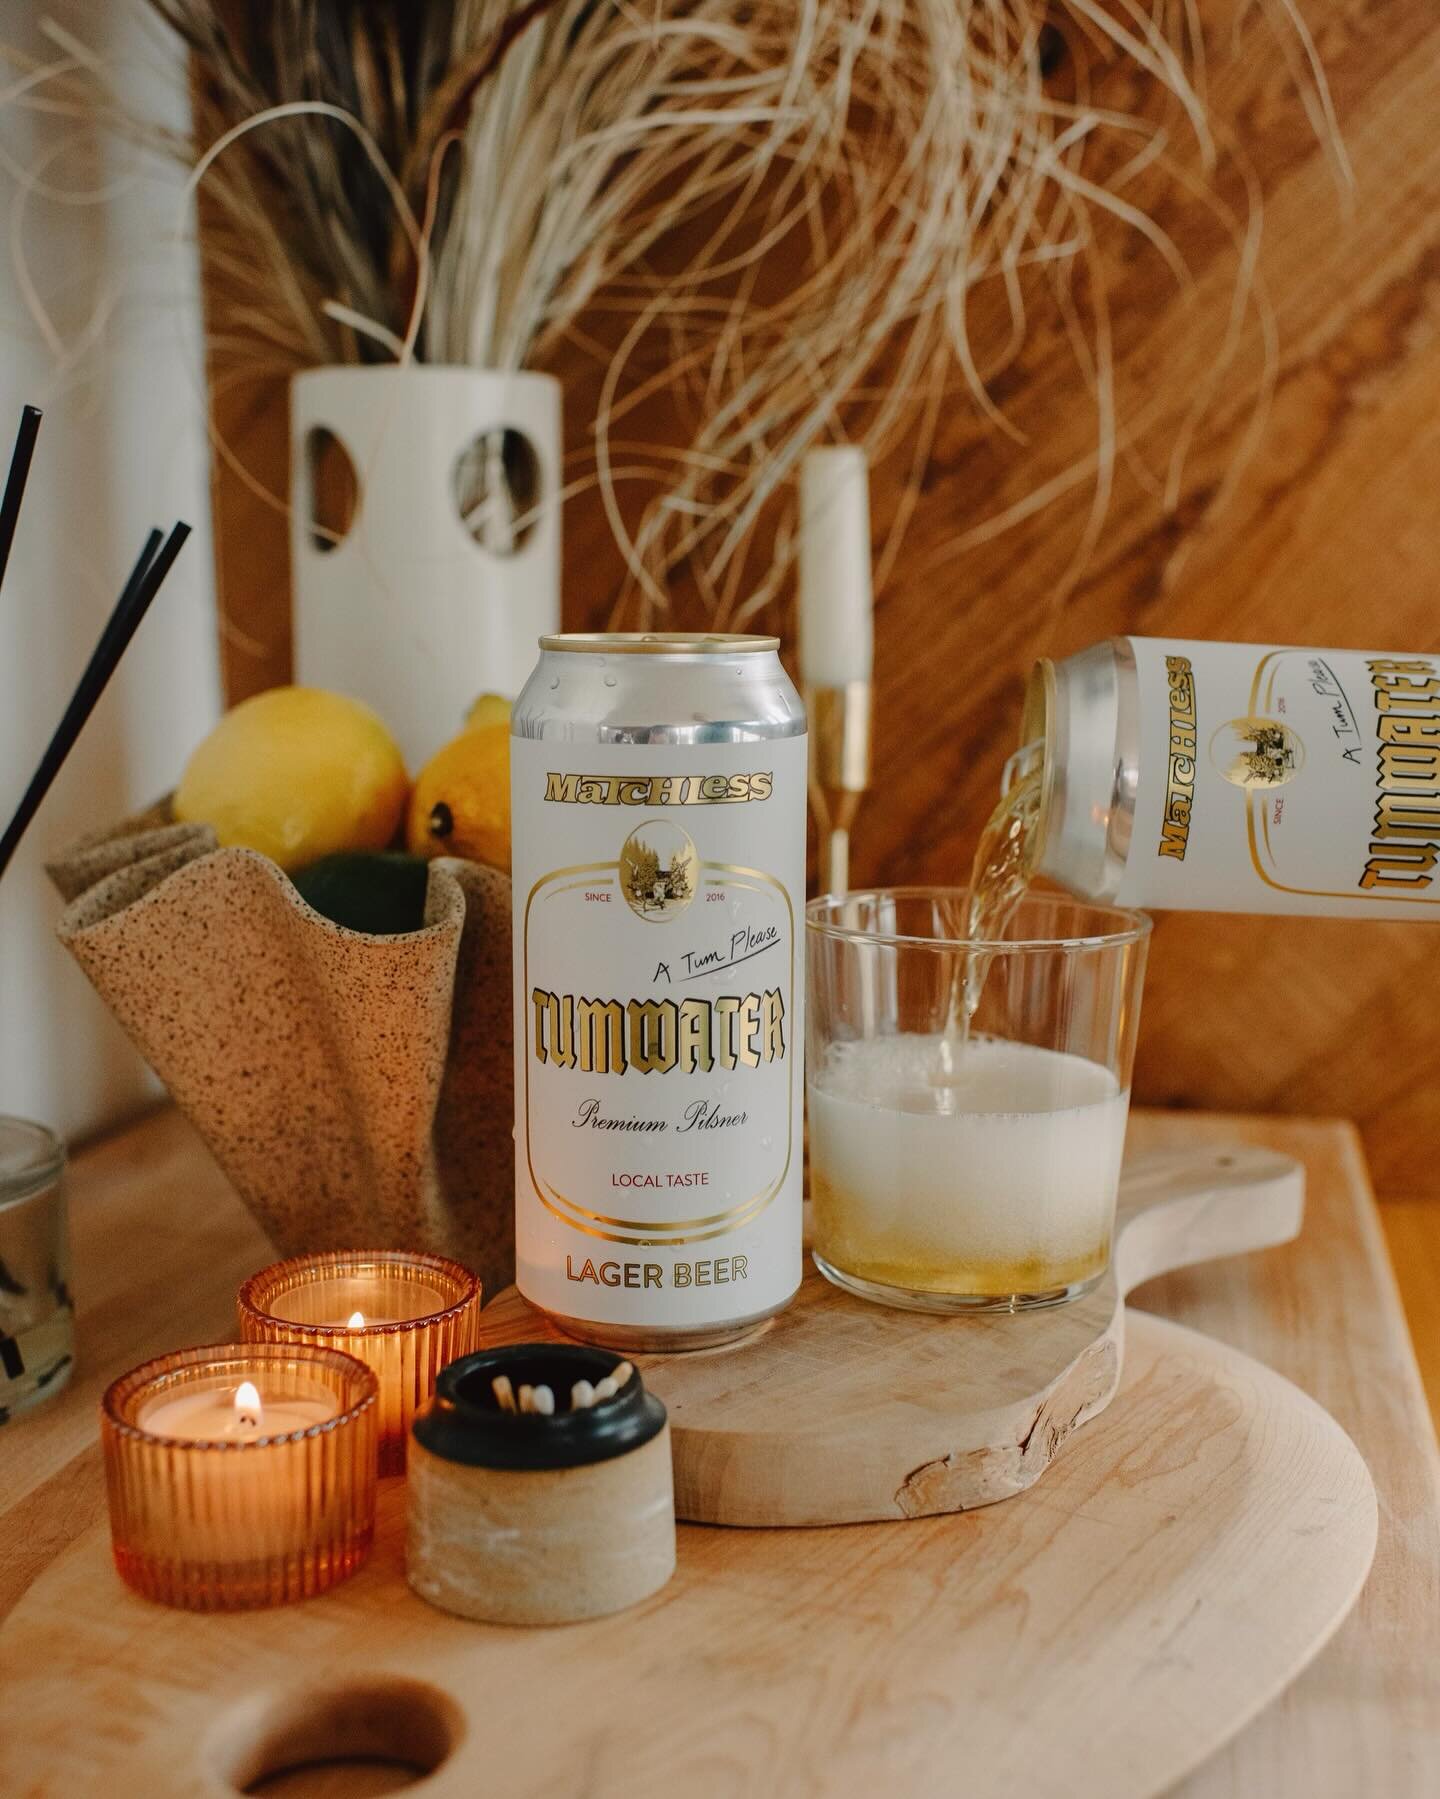 🌾🕯️Tumwater Premium🕯️🌾

It&rsquo;s more than just the water in Tumwater that makes a crisp and effervescent lager premium. It takes Cascadia Pilsner malt from Mainstem Malt and Adeena hops from Roy Farms for citrusy, herbal and spicy notes. Toget